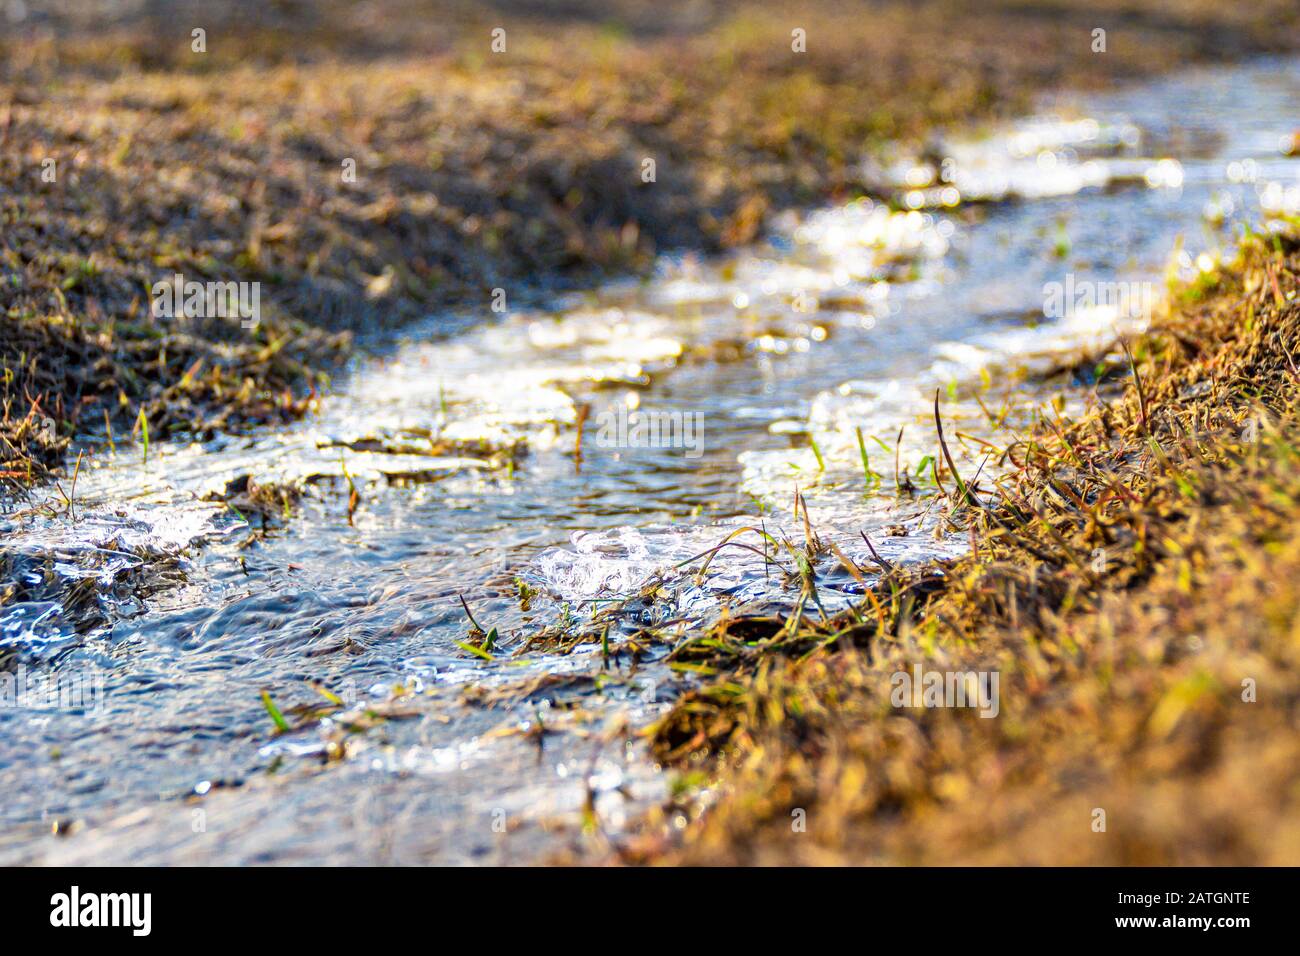 a spring creek partially covered with ice flows among the dried grass Stock Photo